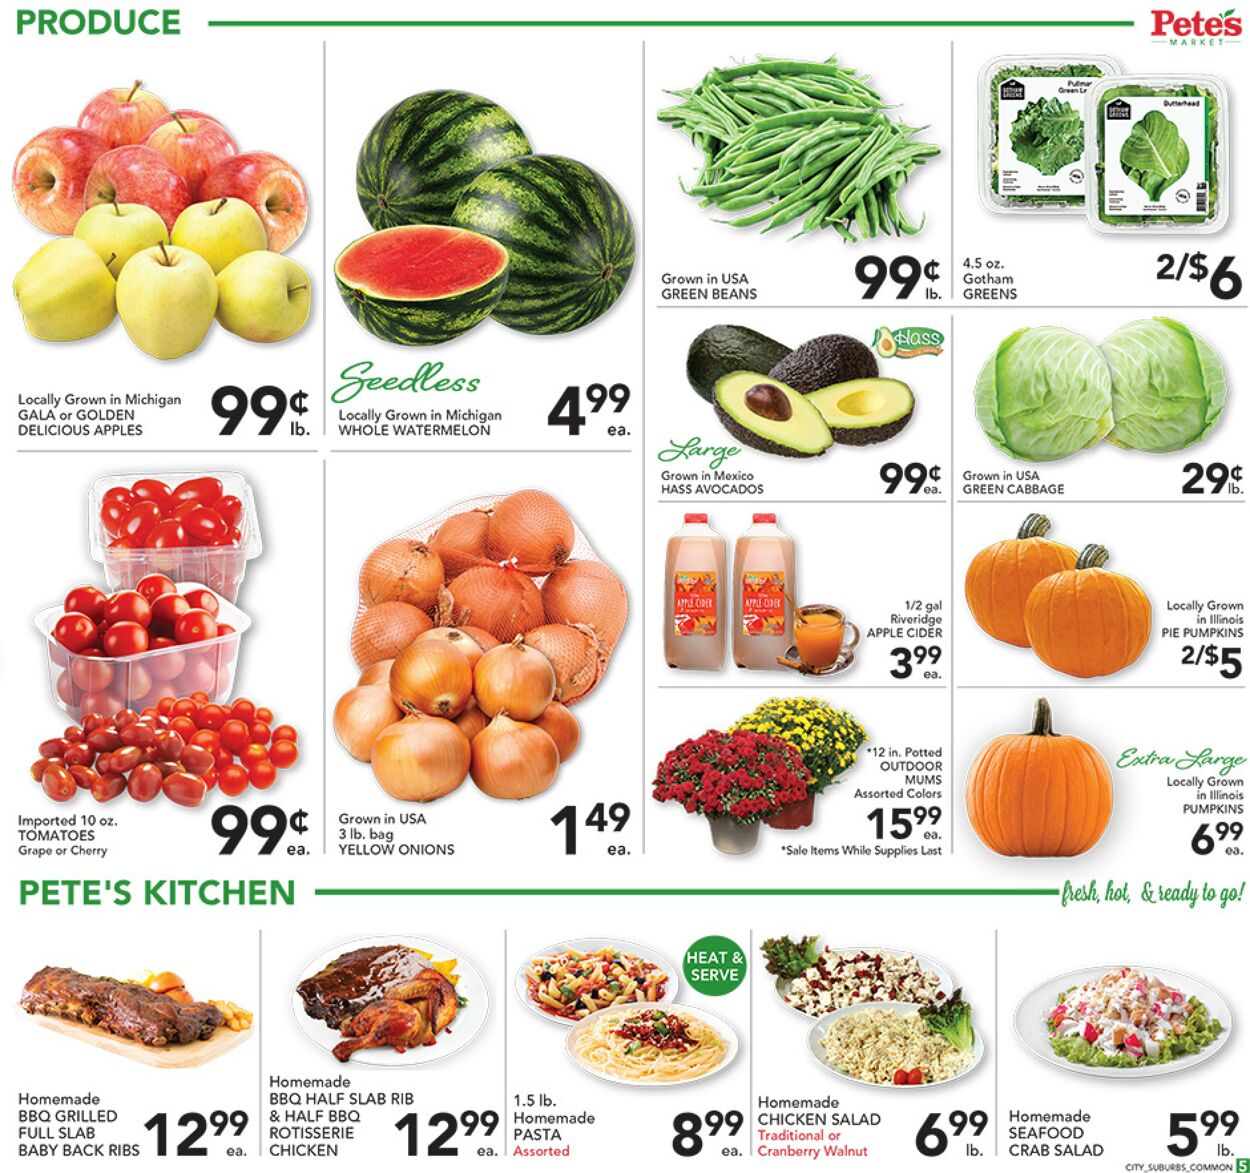 Weekly ad Pete's Fresh Market 09/21/2022 - 09/27/2022